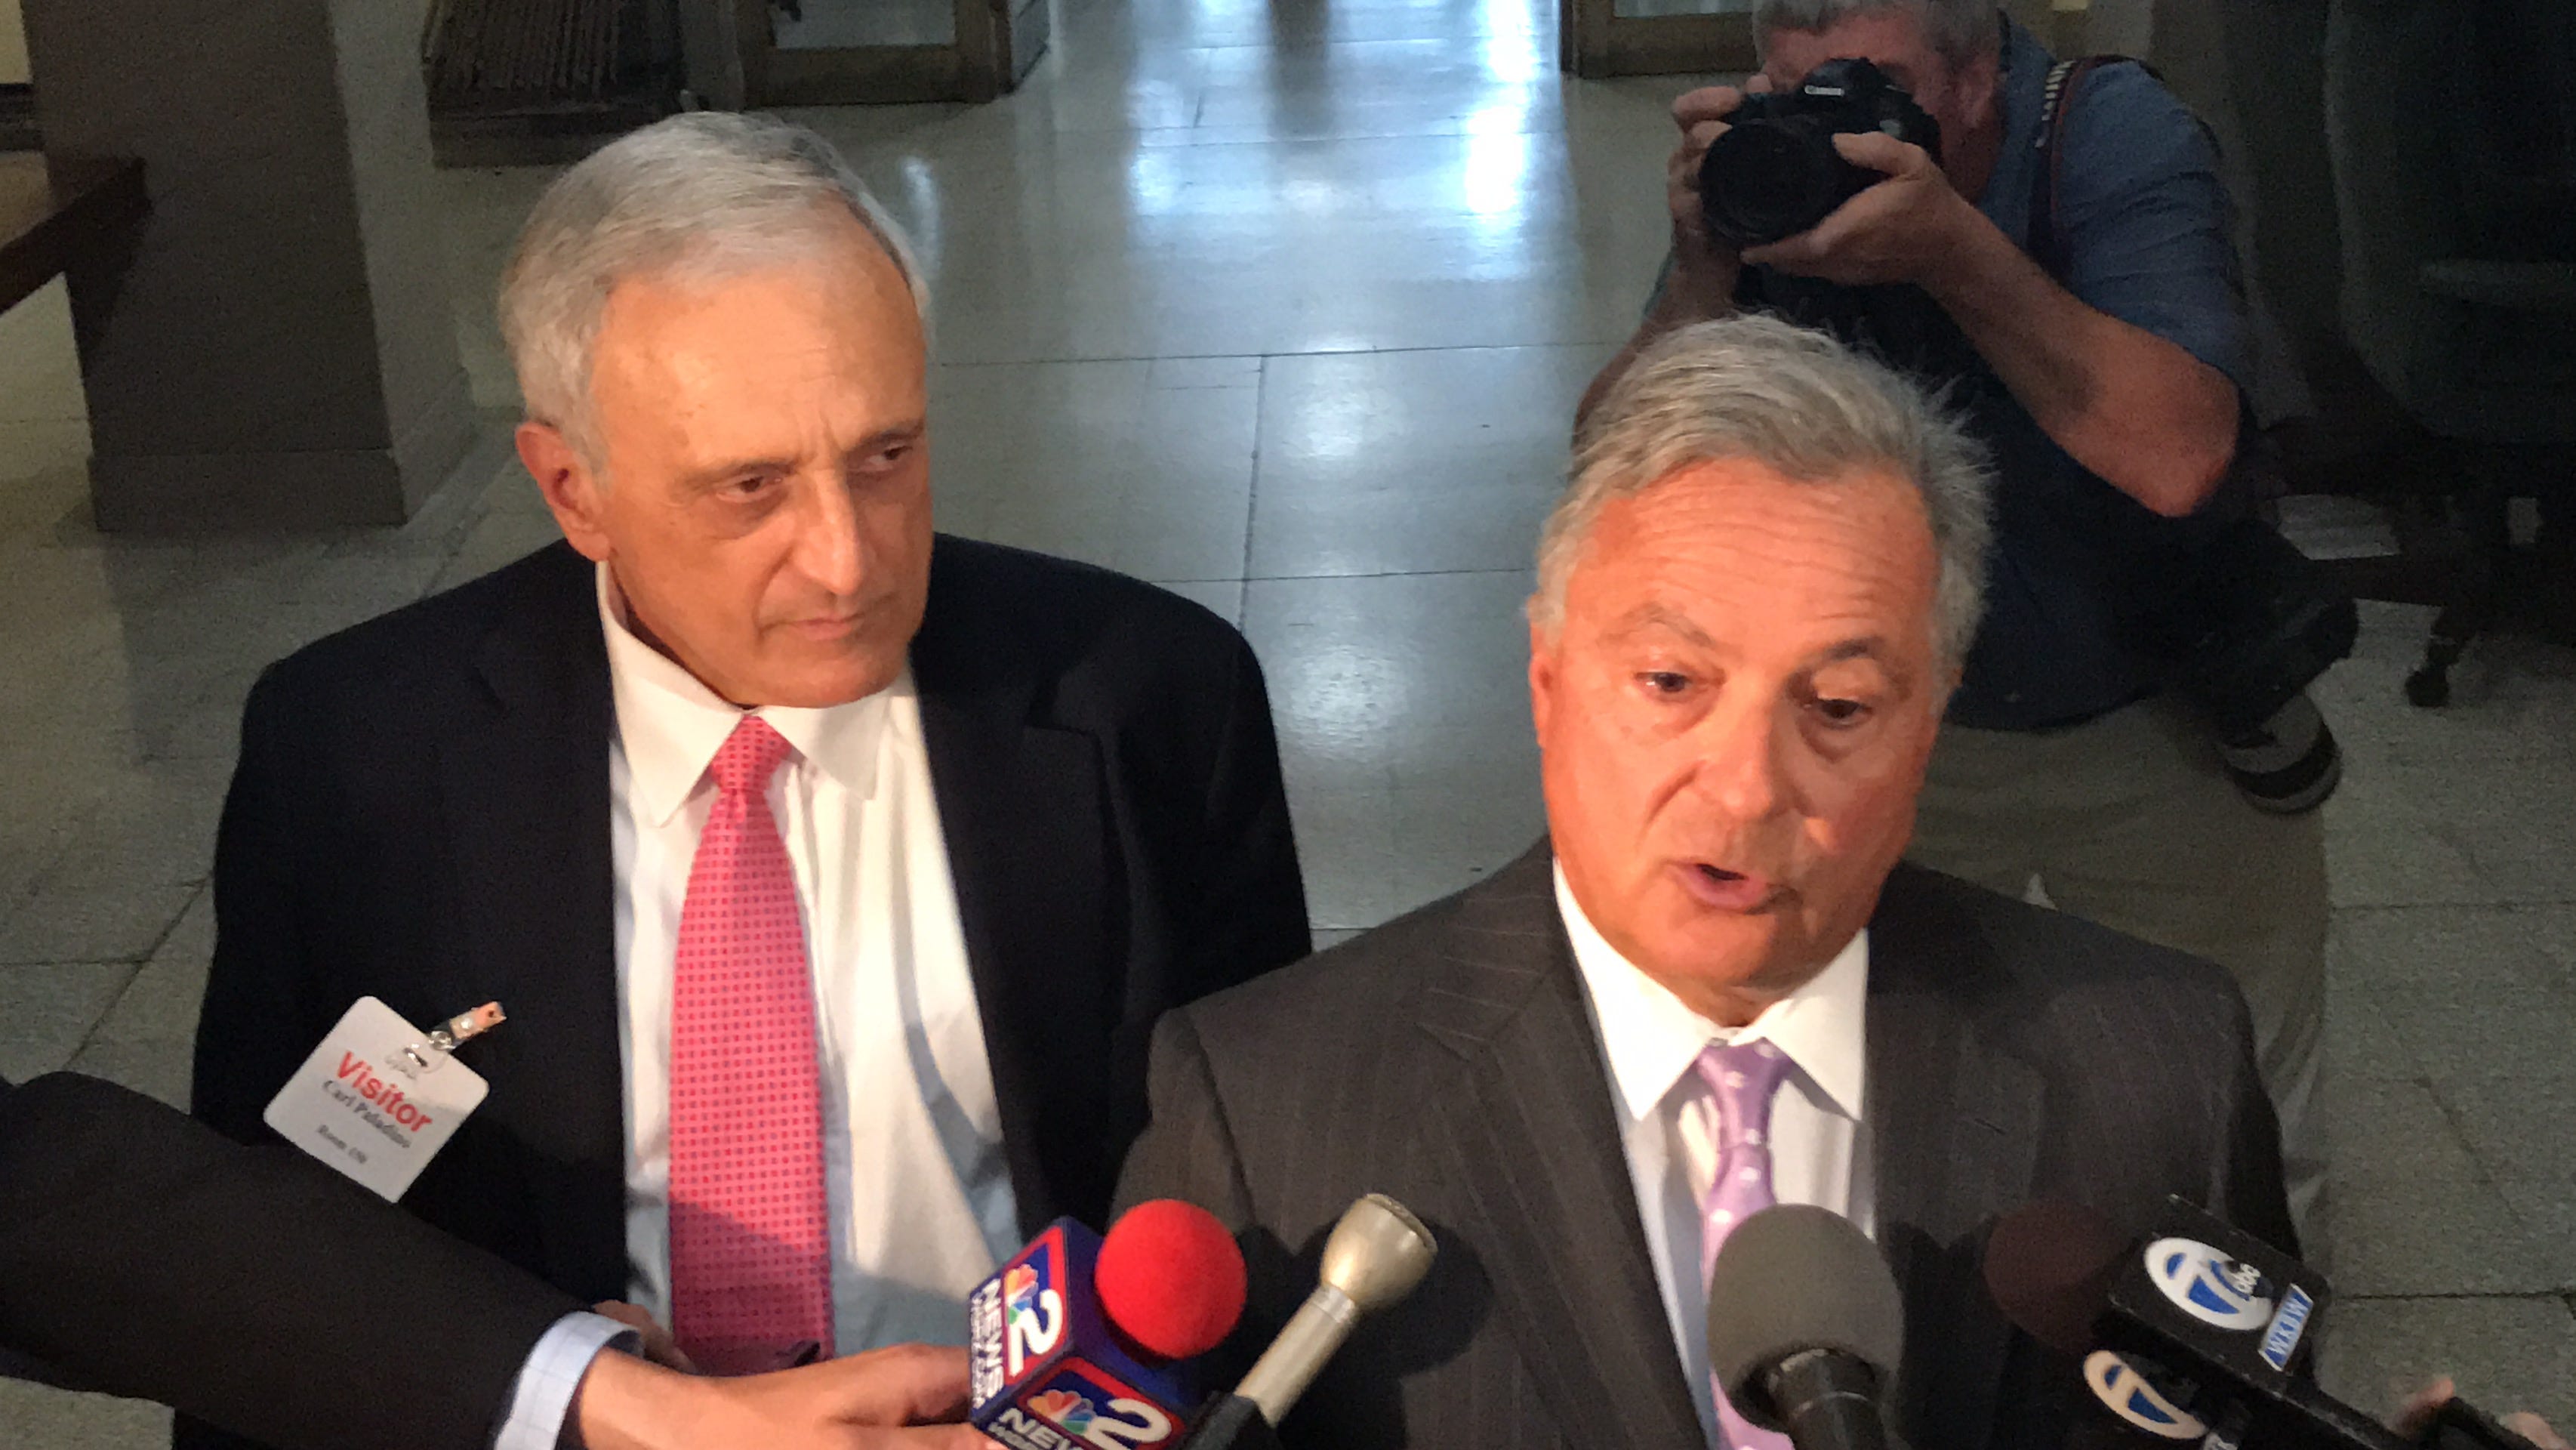 Education chief weighs Carl Paladino's ouster